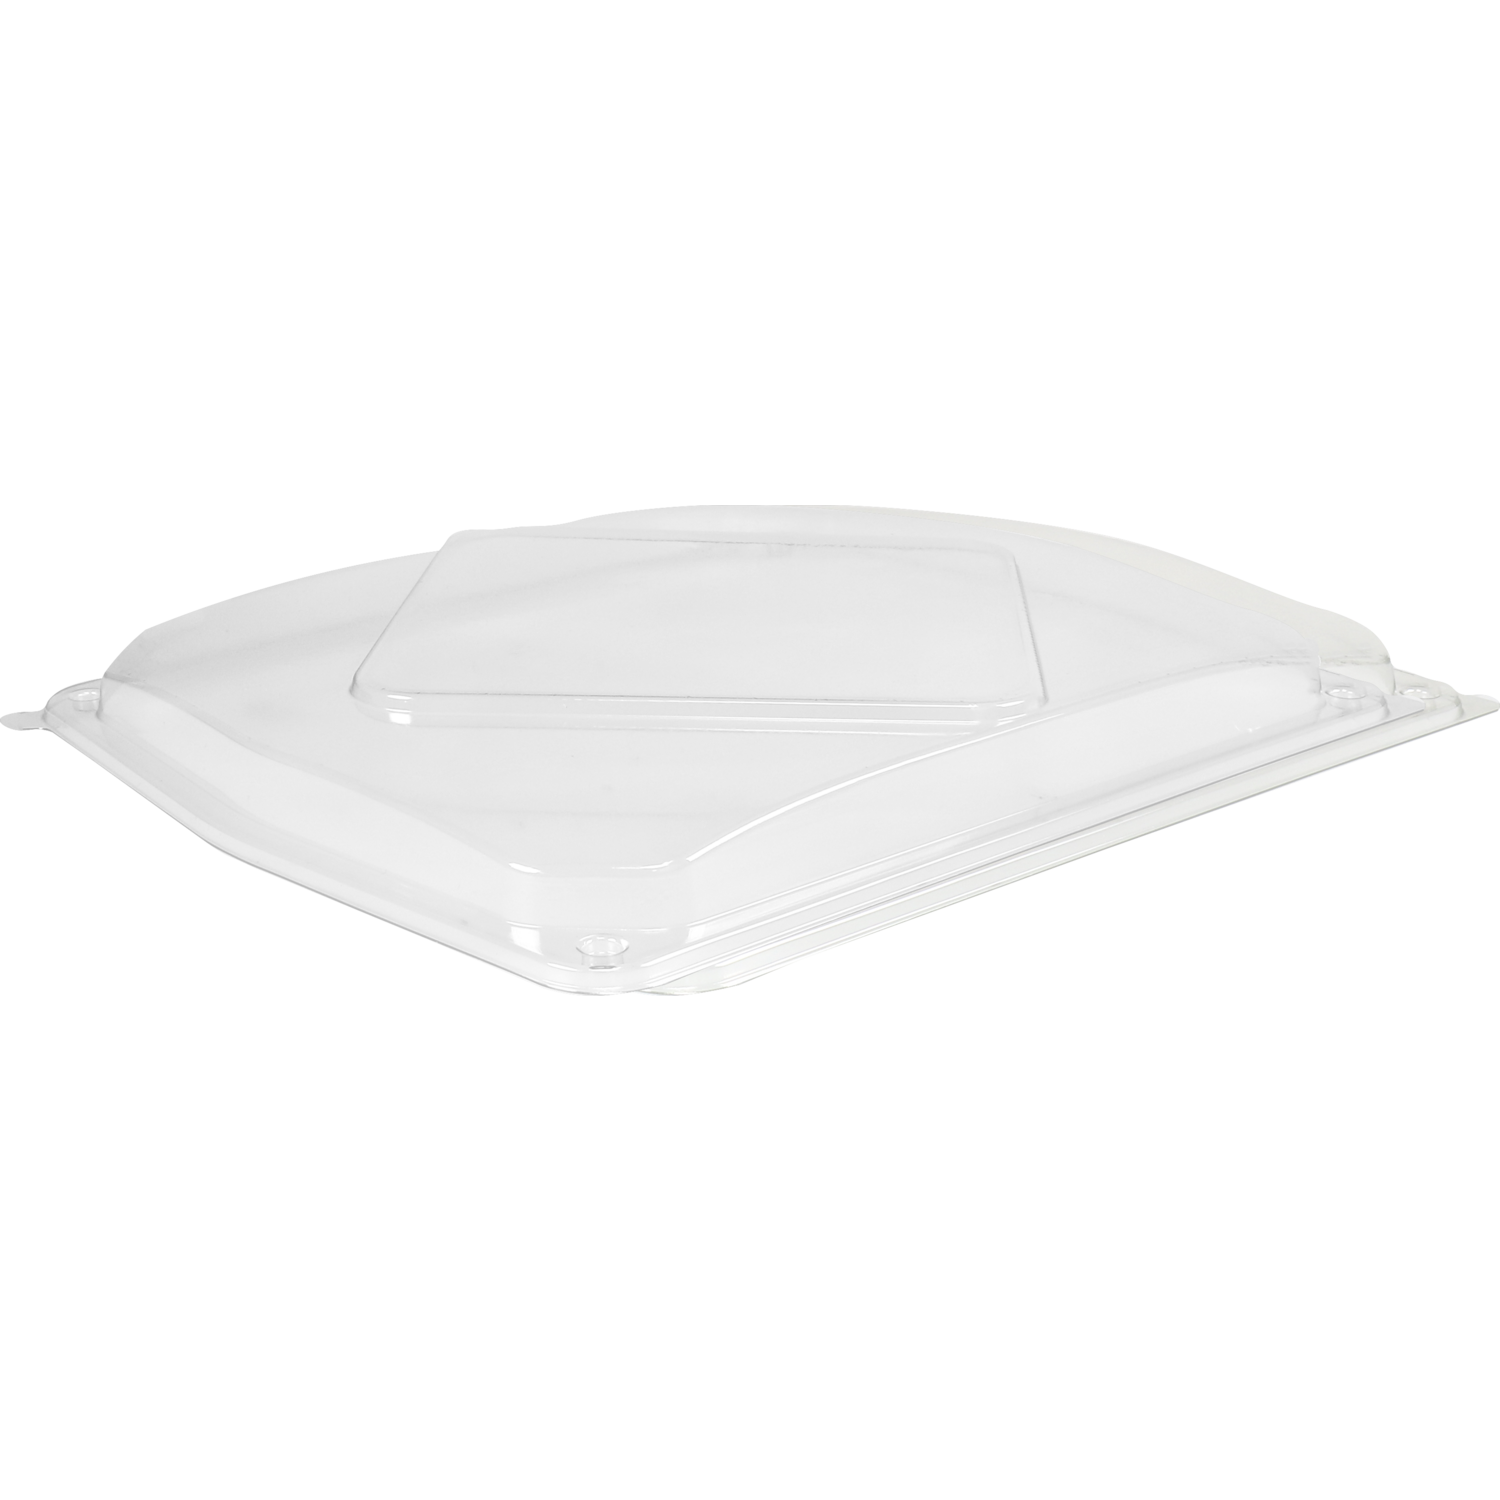 Lid, catering platter, Recycled PET, 320x265x32mm, transparent 1